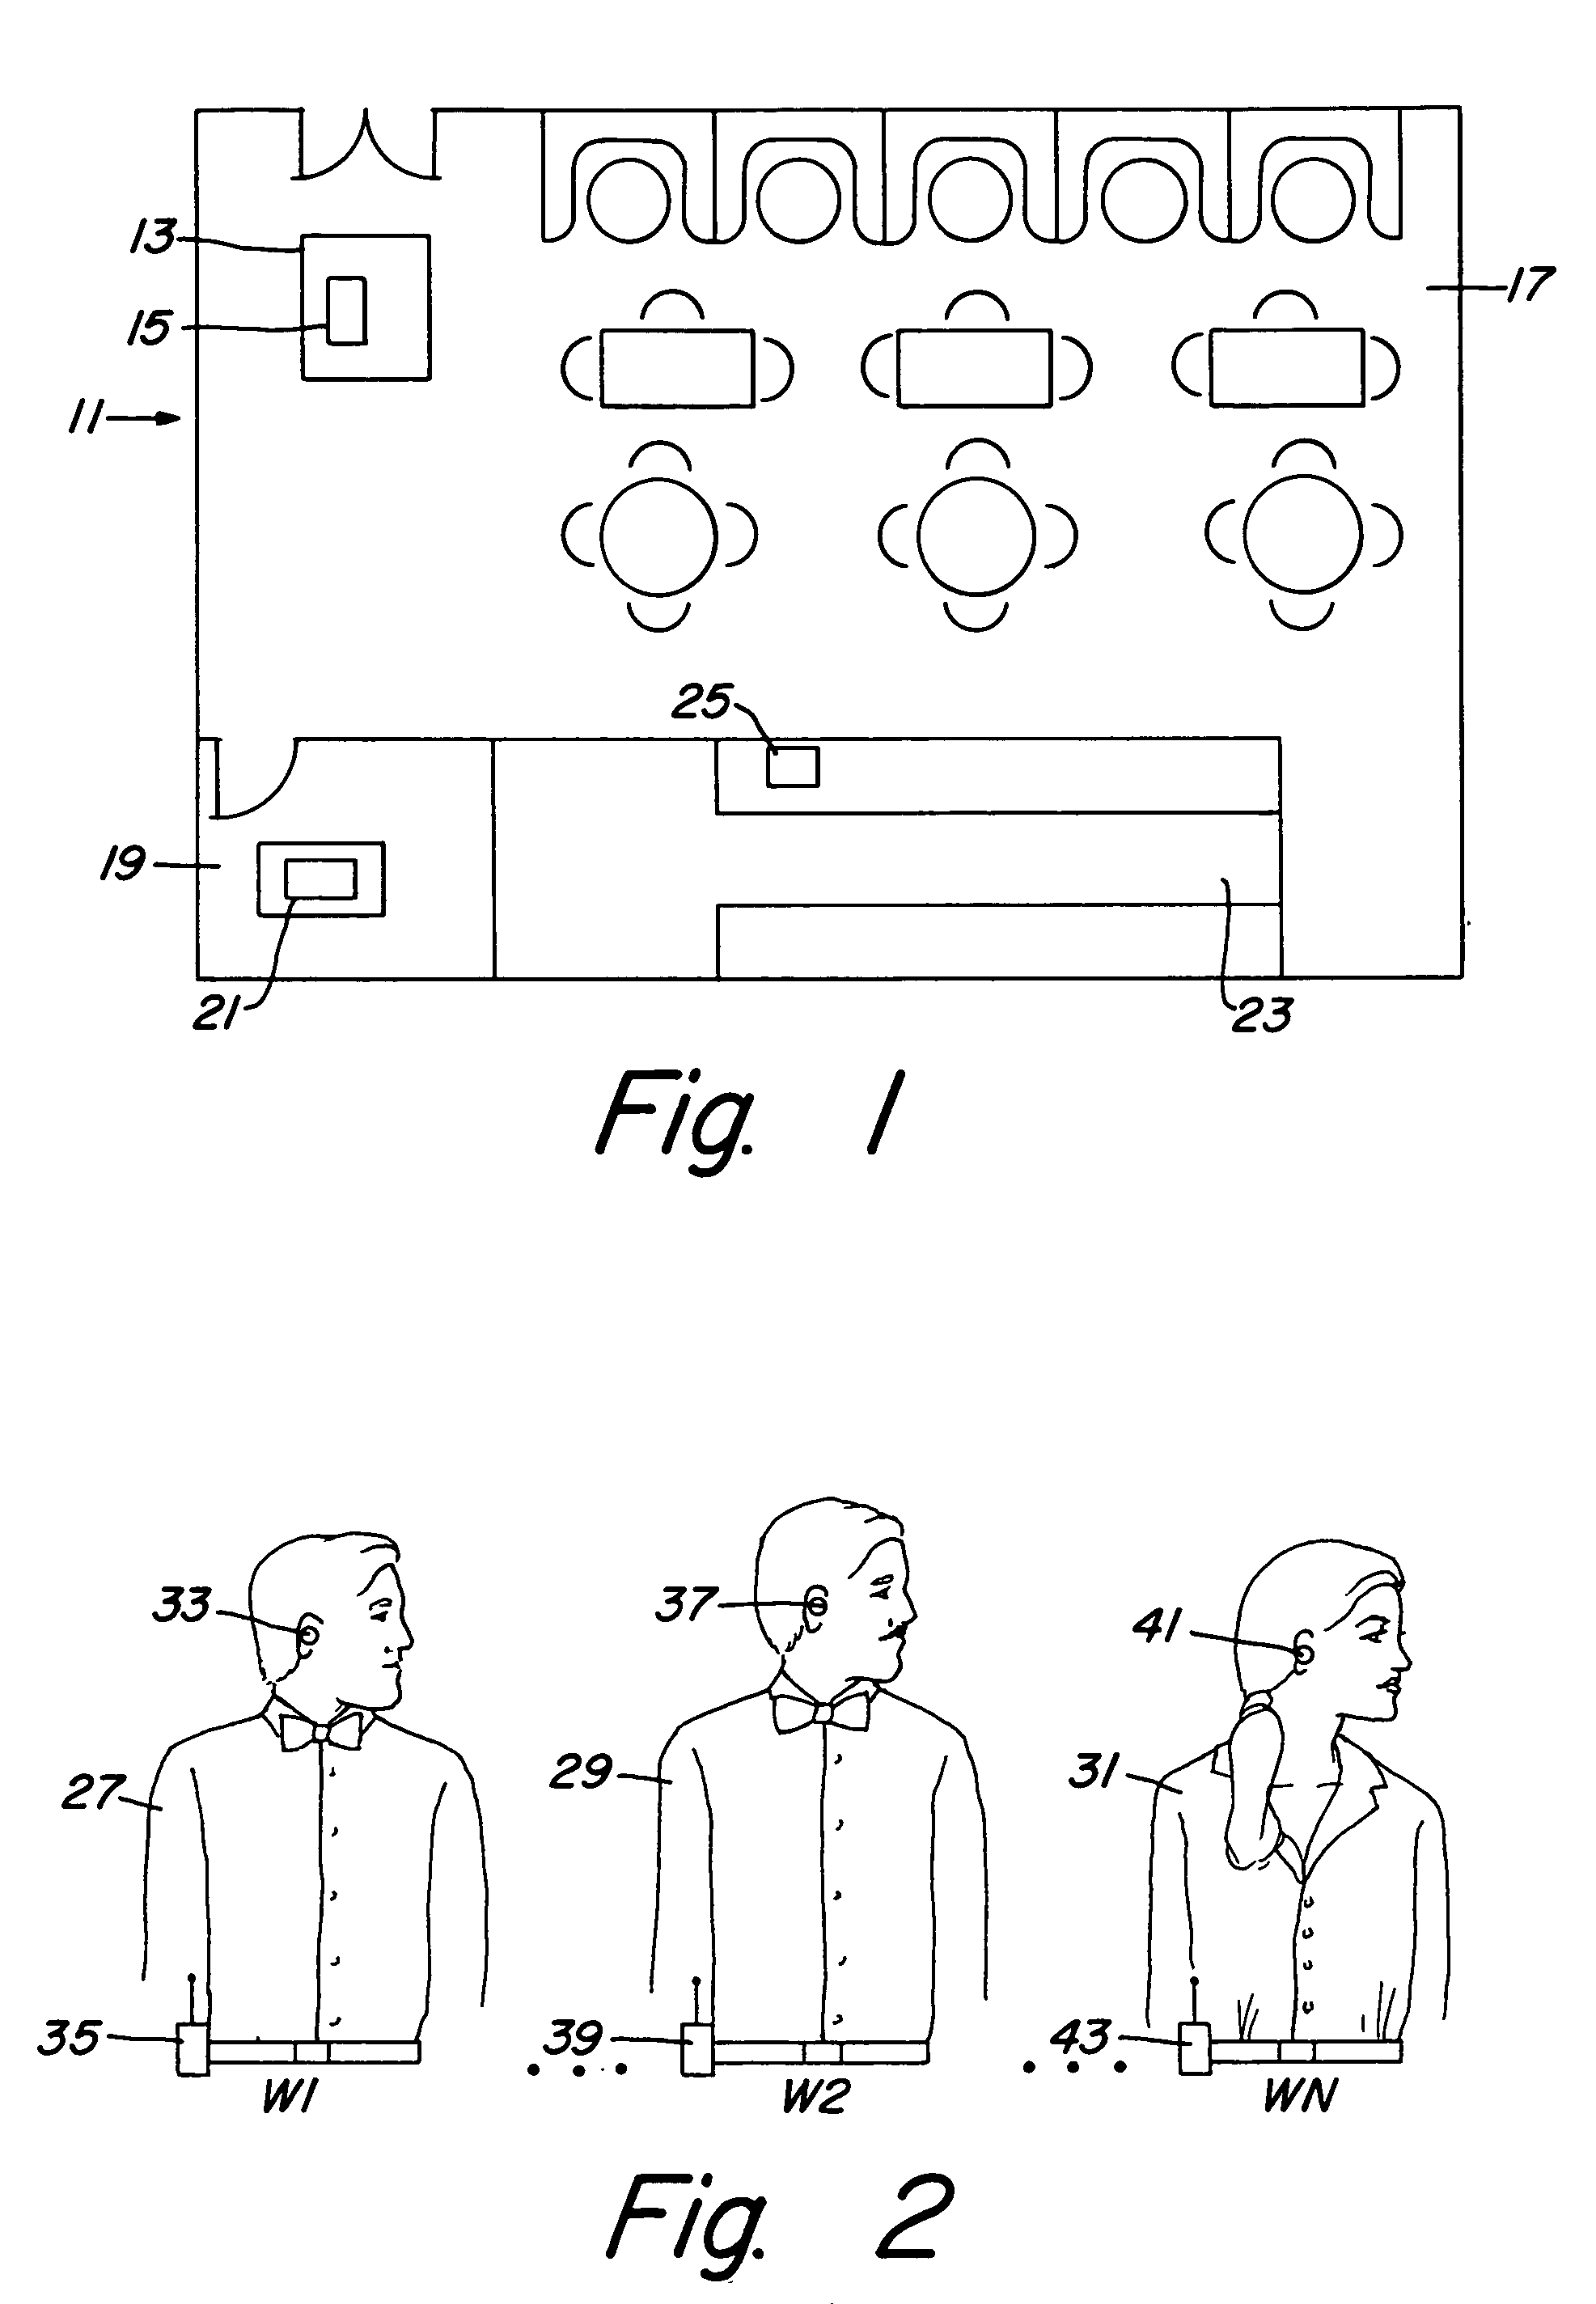 Point-of-sale customer order system utilizing an unobtrusive transmitter/receiver and voice recognition software